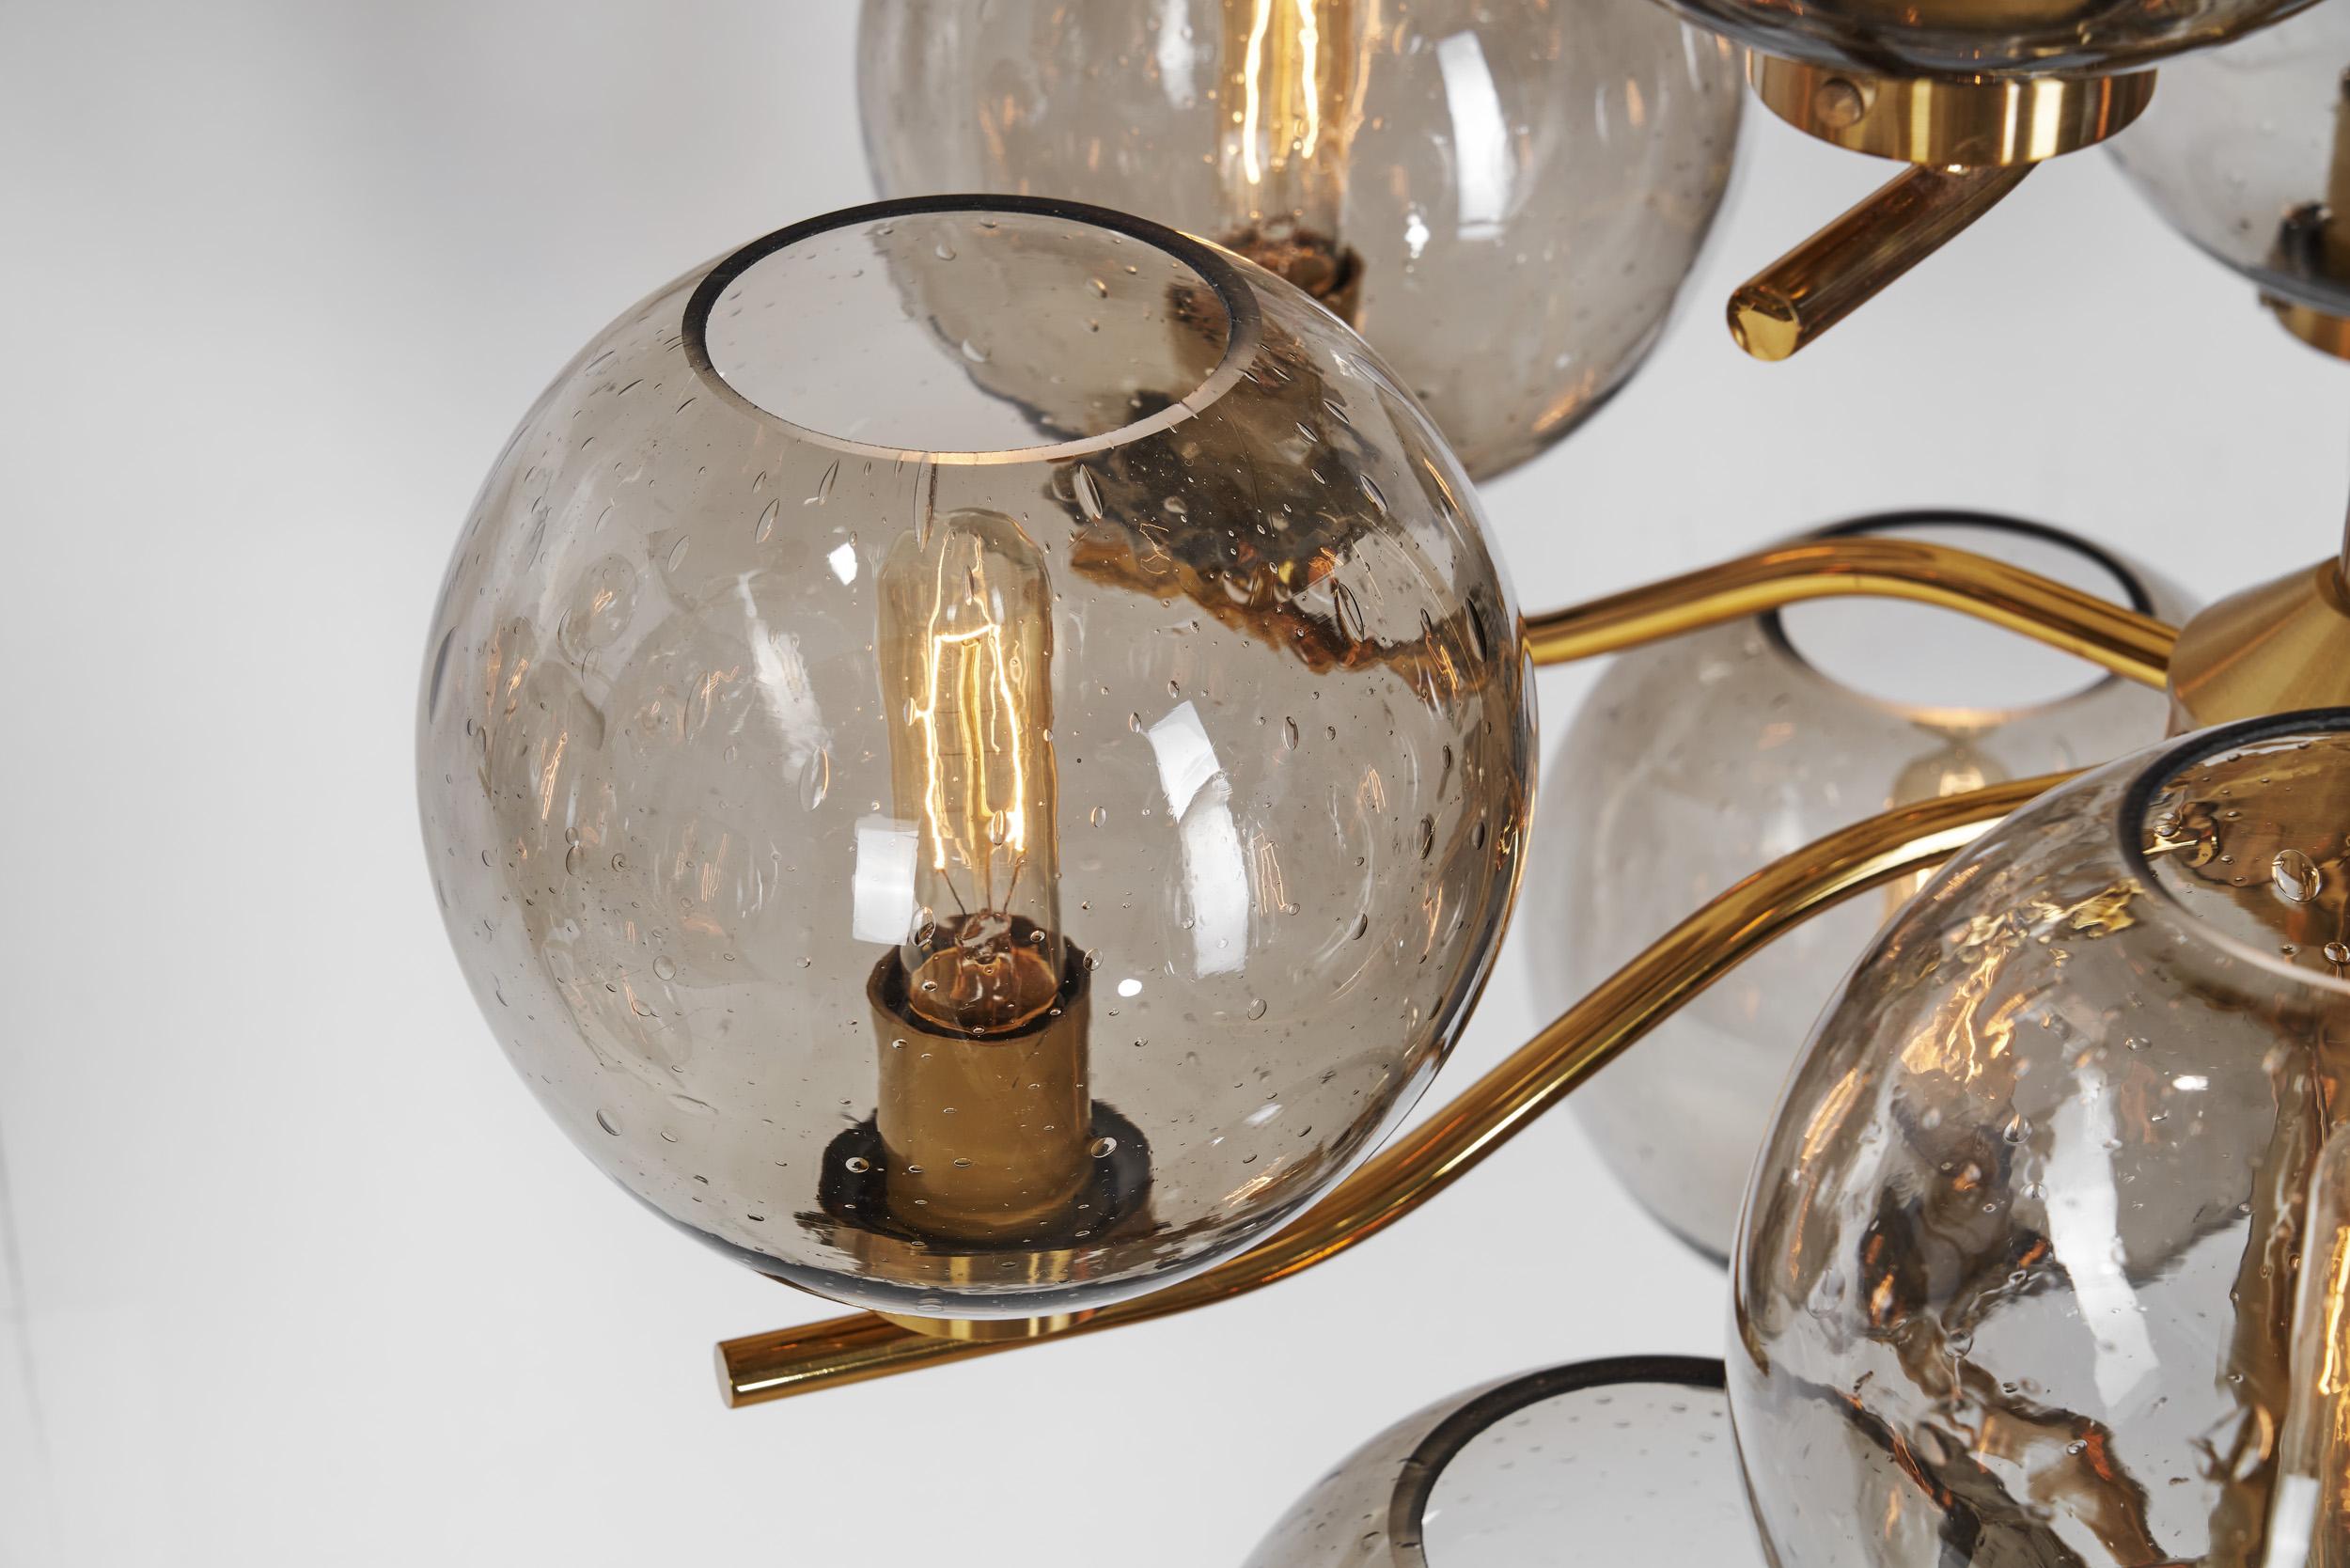 Holger Johansson Set of 6 Chandeliers with 12 Smoked Glass Shades, Sweden 1970s For Sale 2